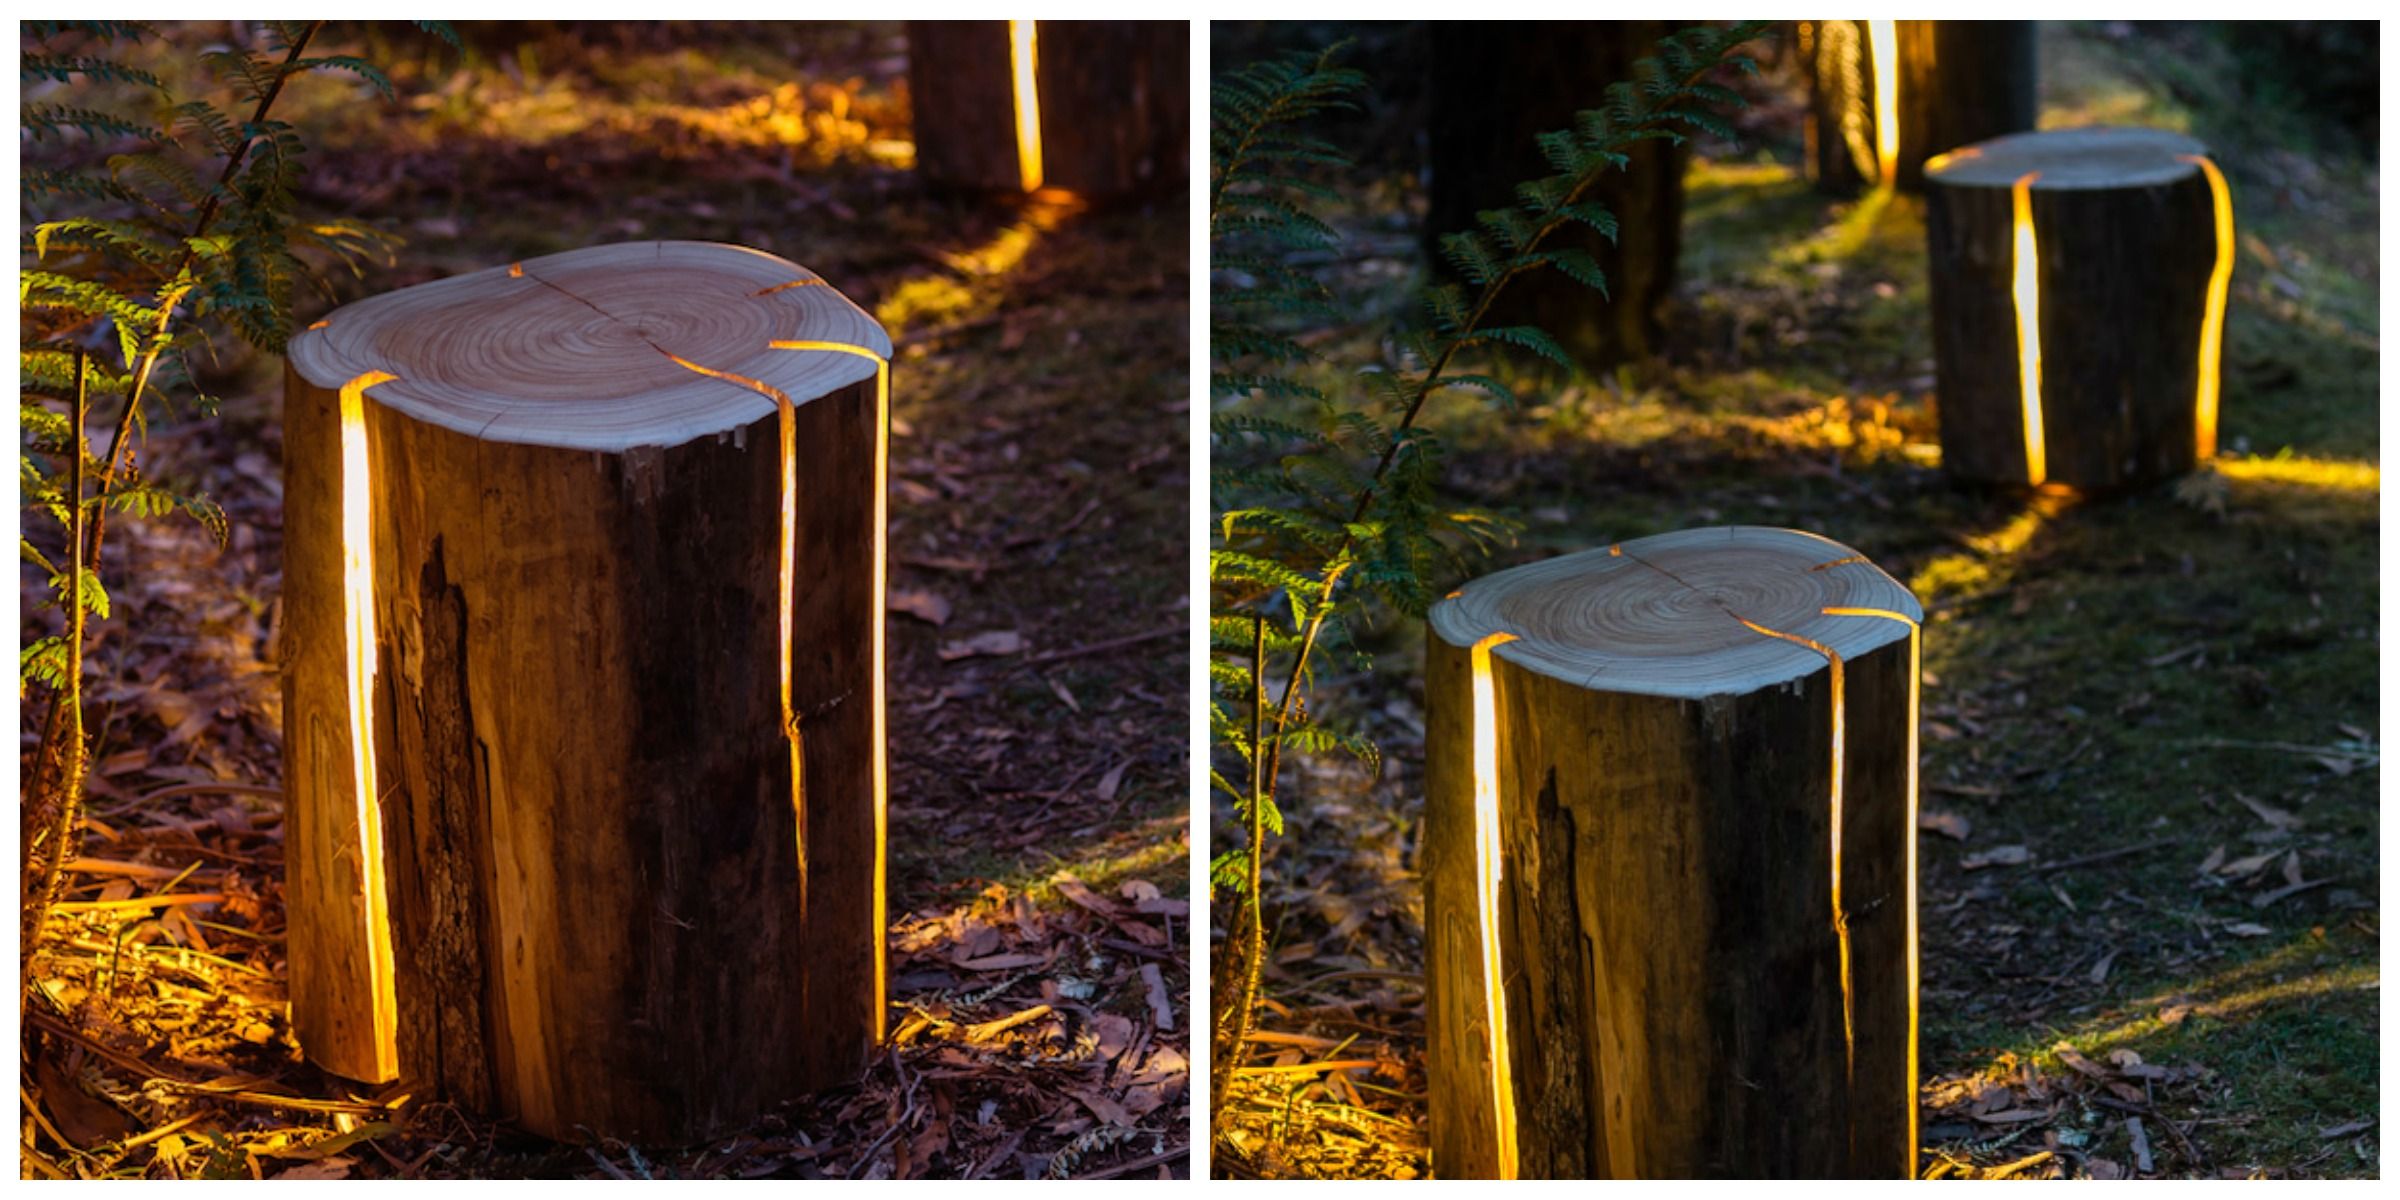 Alluring decorative tree stumps for sale Bring Nature Into Your Home With These Illuminated Tree Stumps